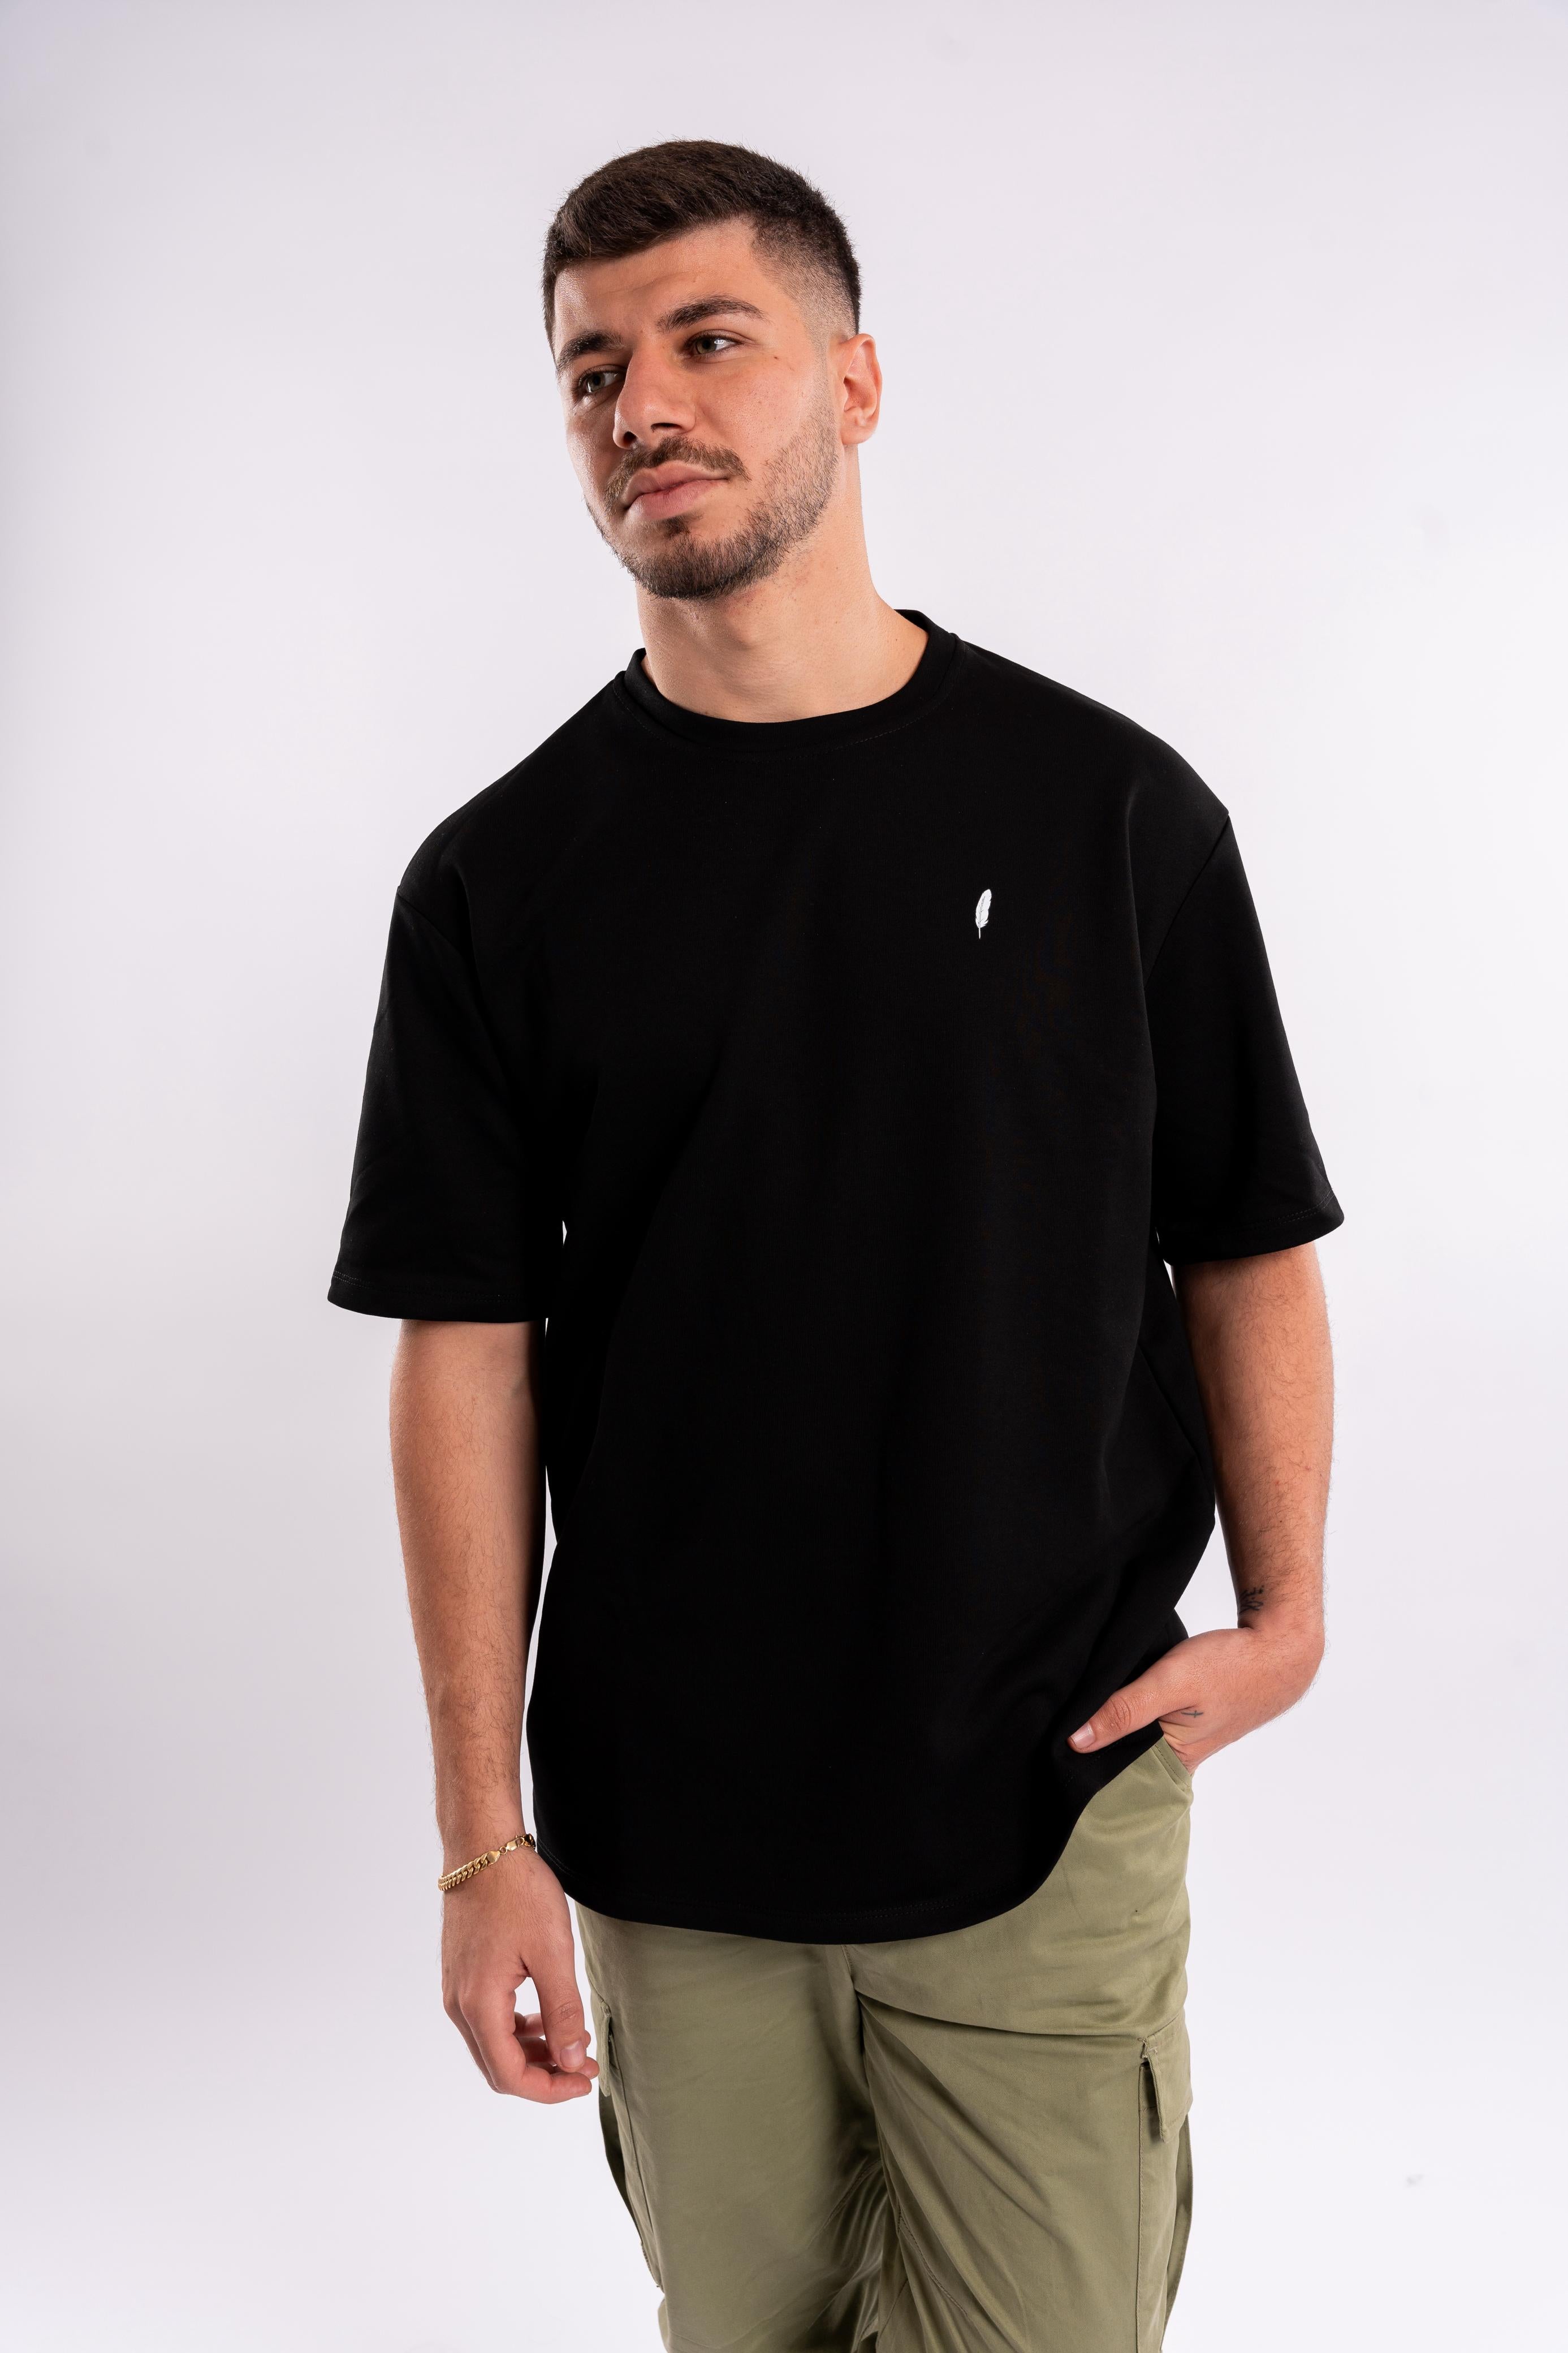 The feather: Black T-shirt